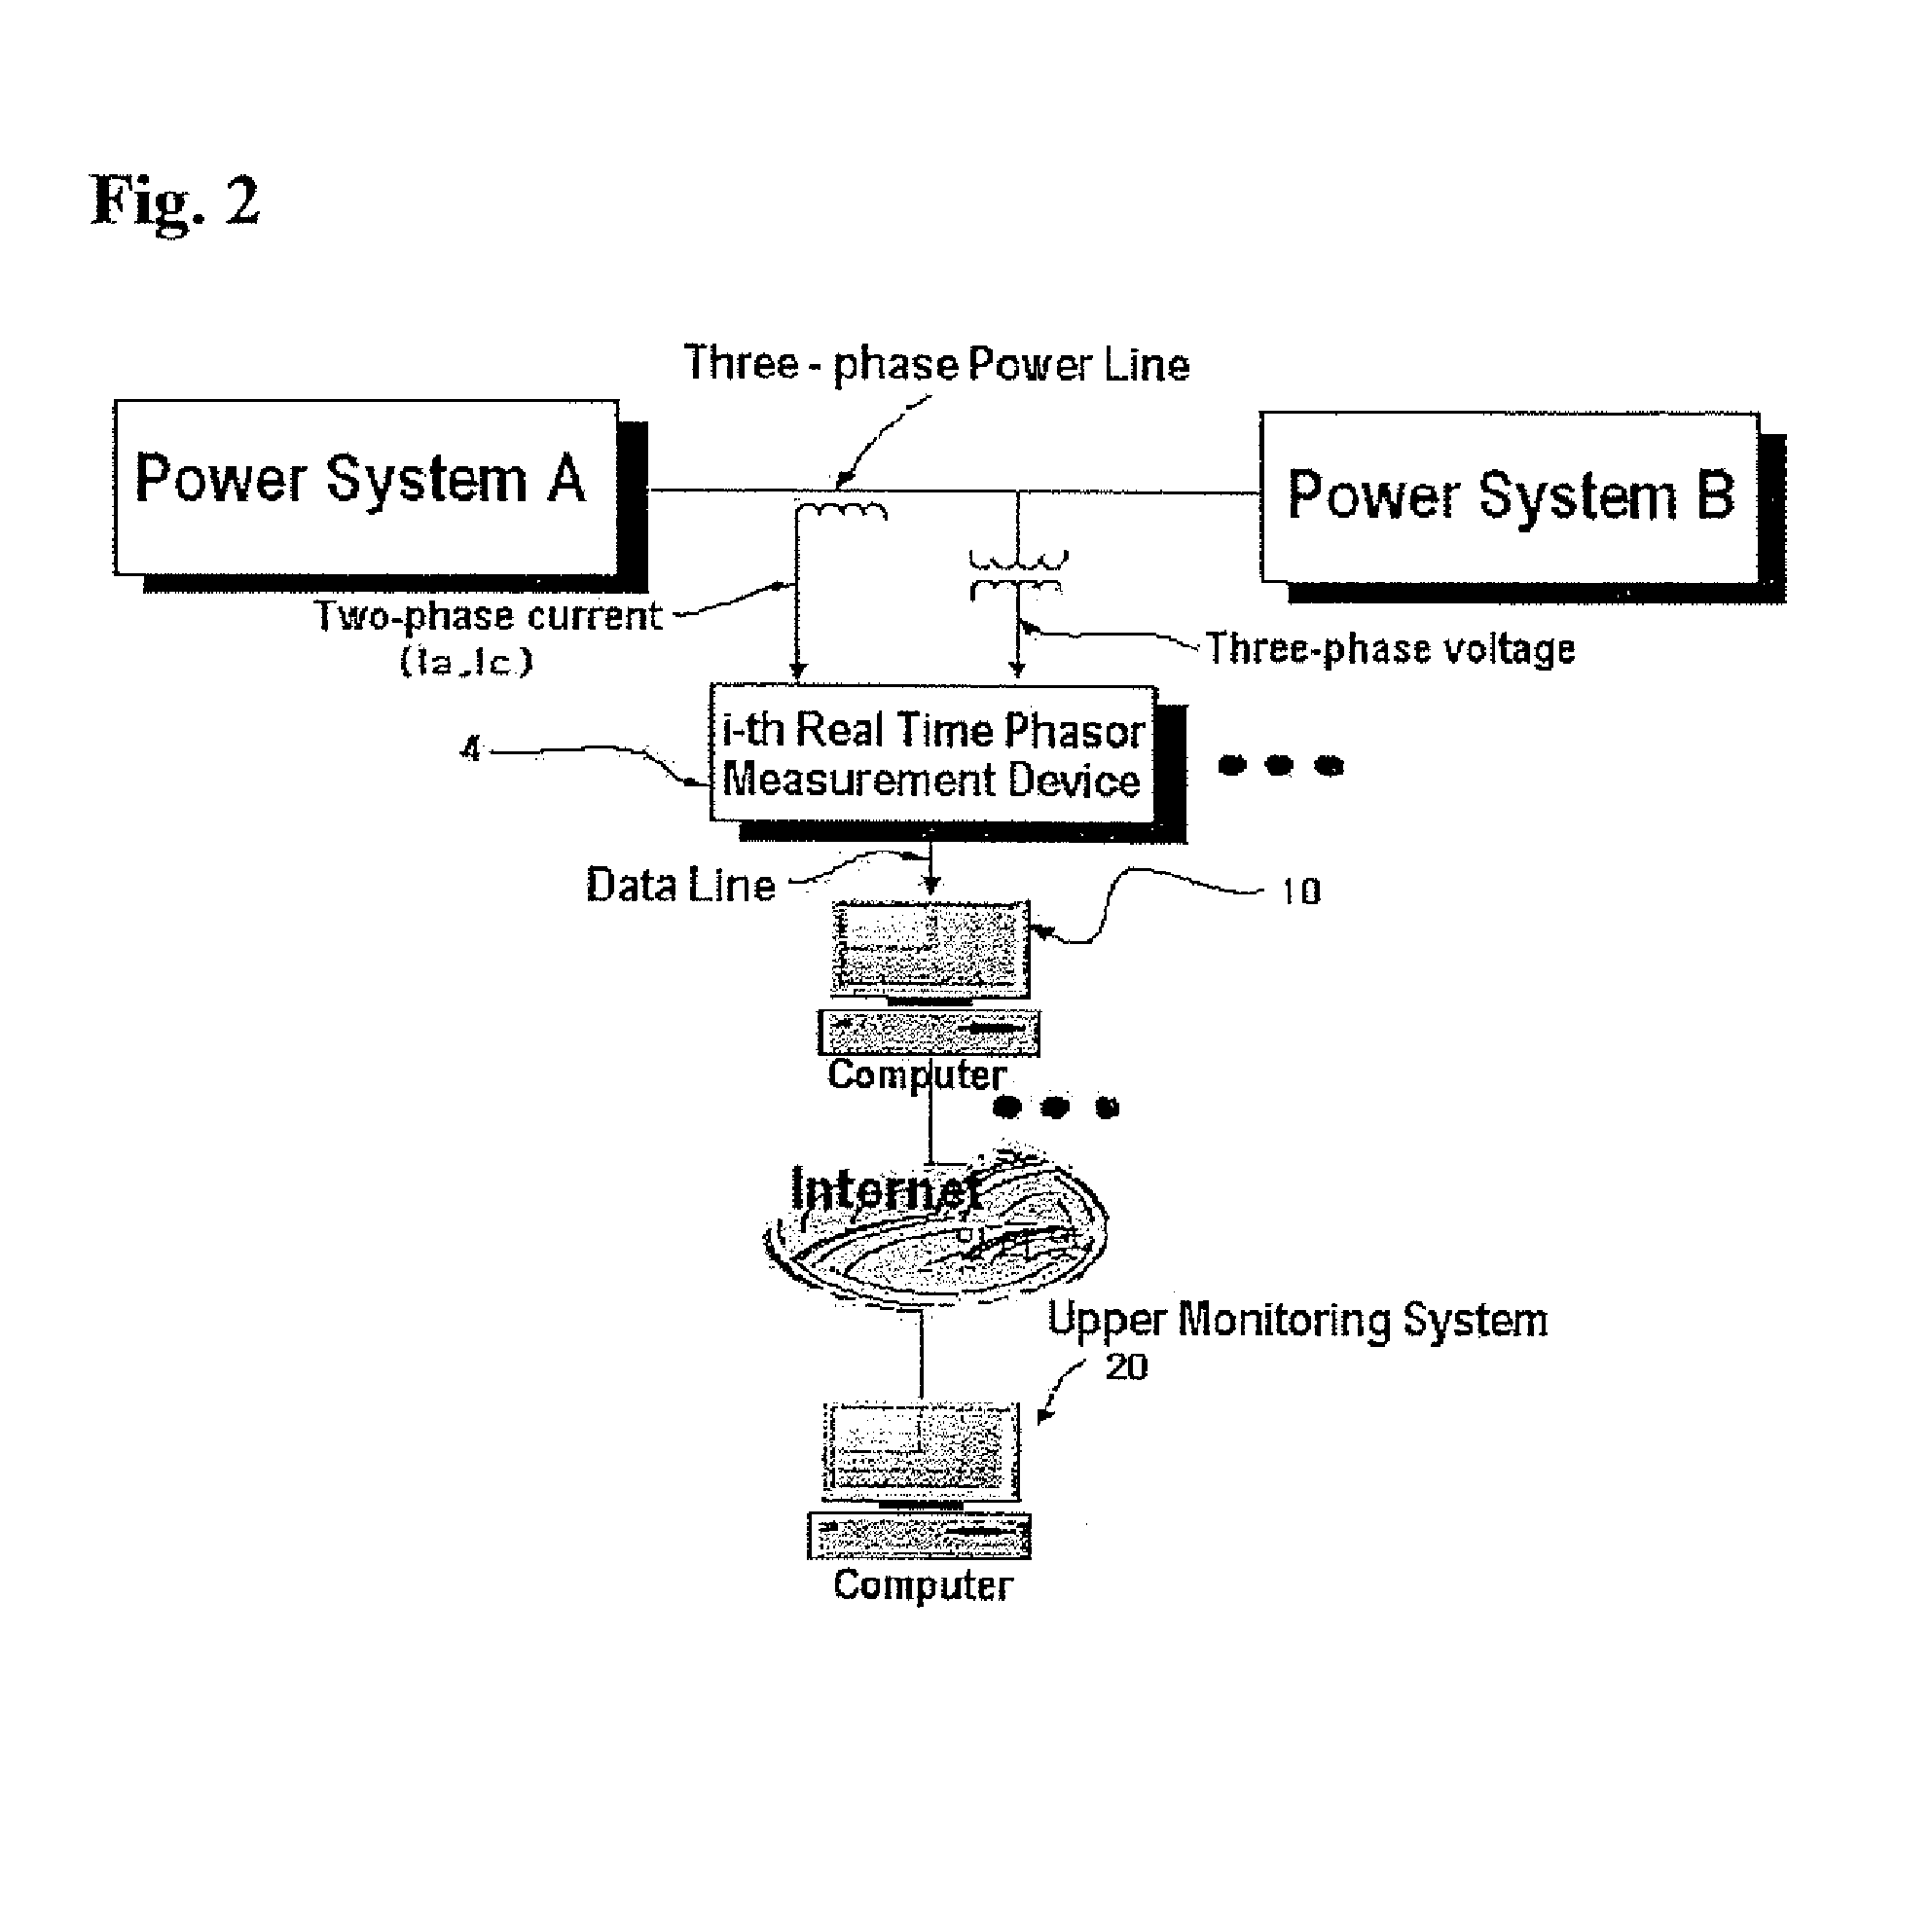 System and method for calculating real-time voltage stability risk index in power system using time series data